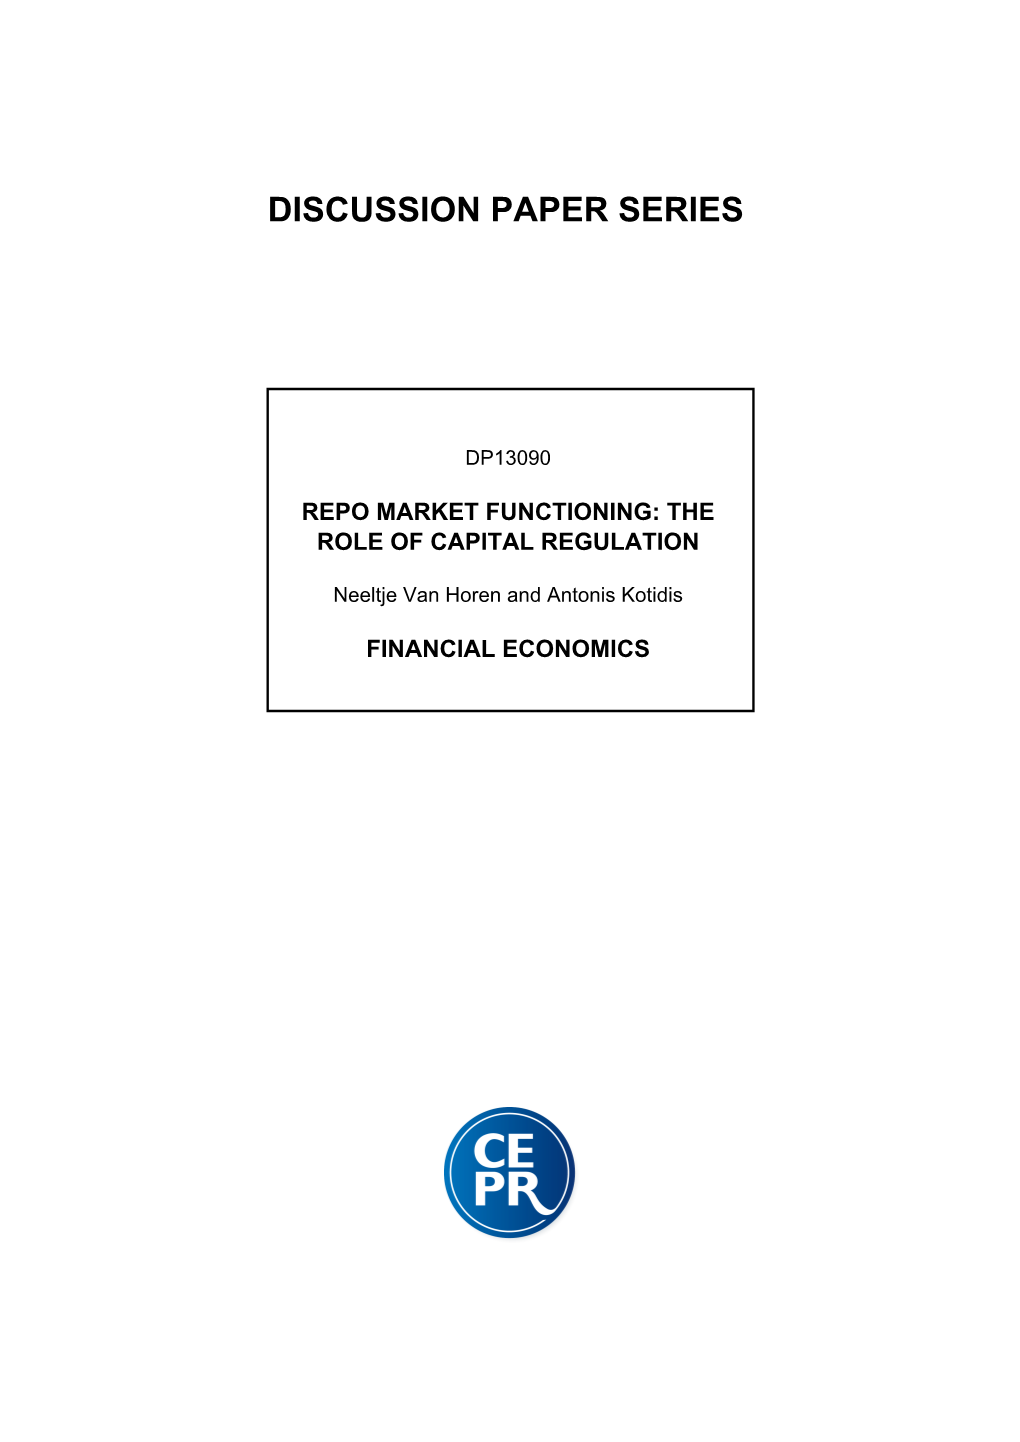 Repo Market Functioning: the Role of Capital Regulation